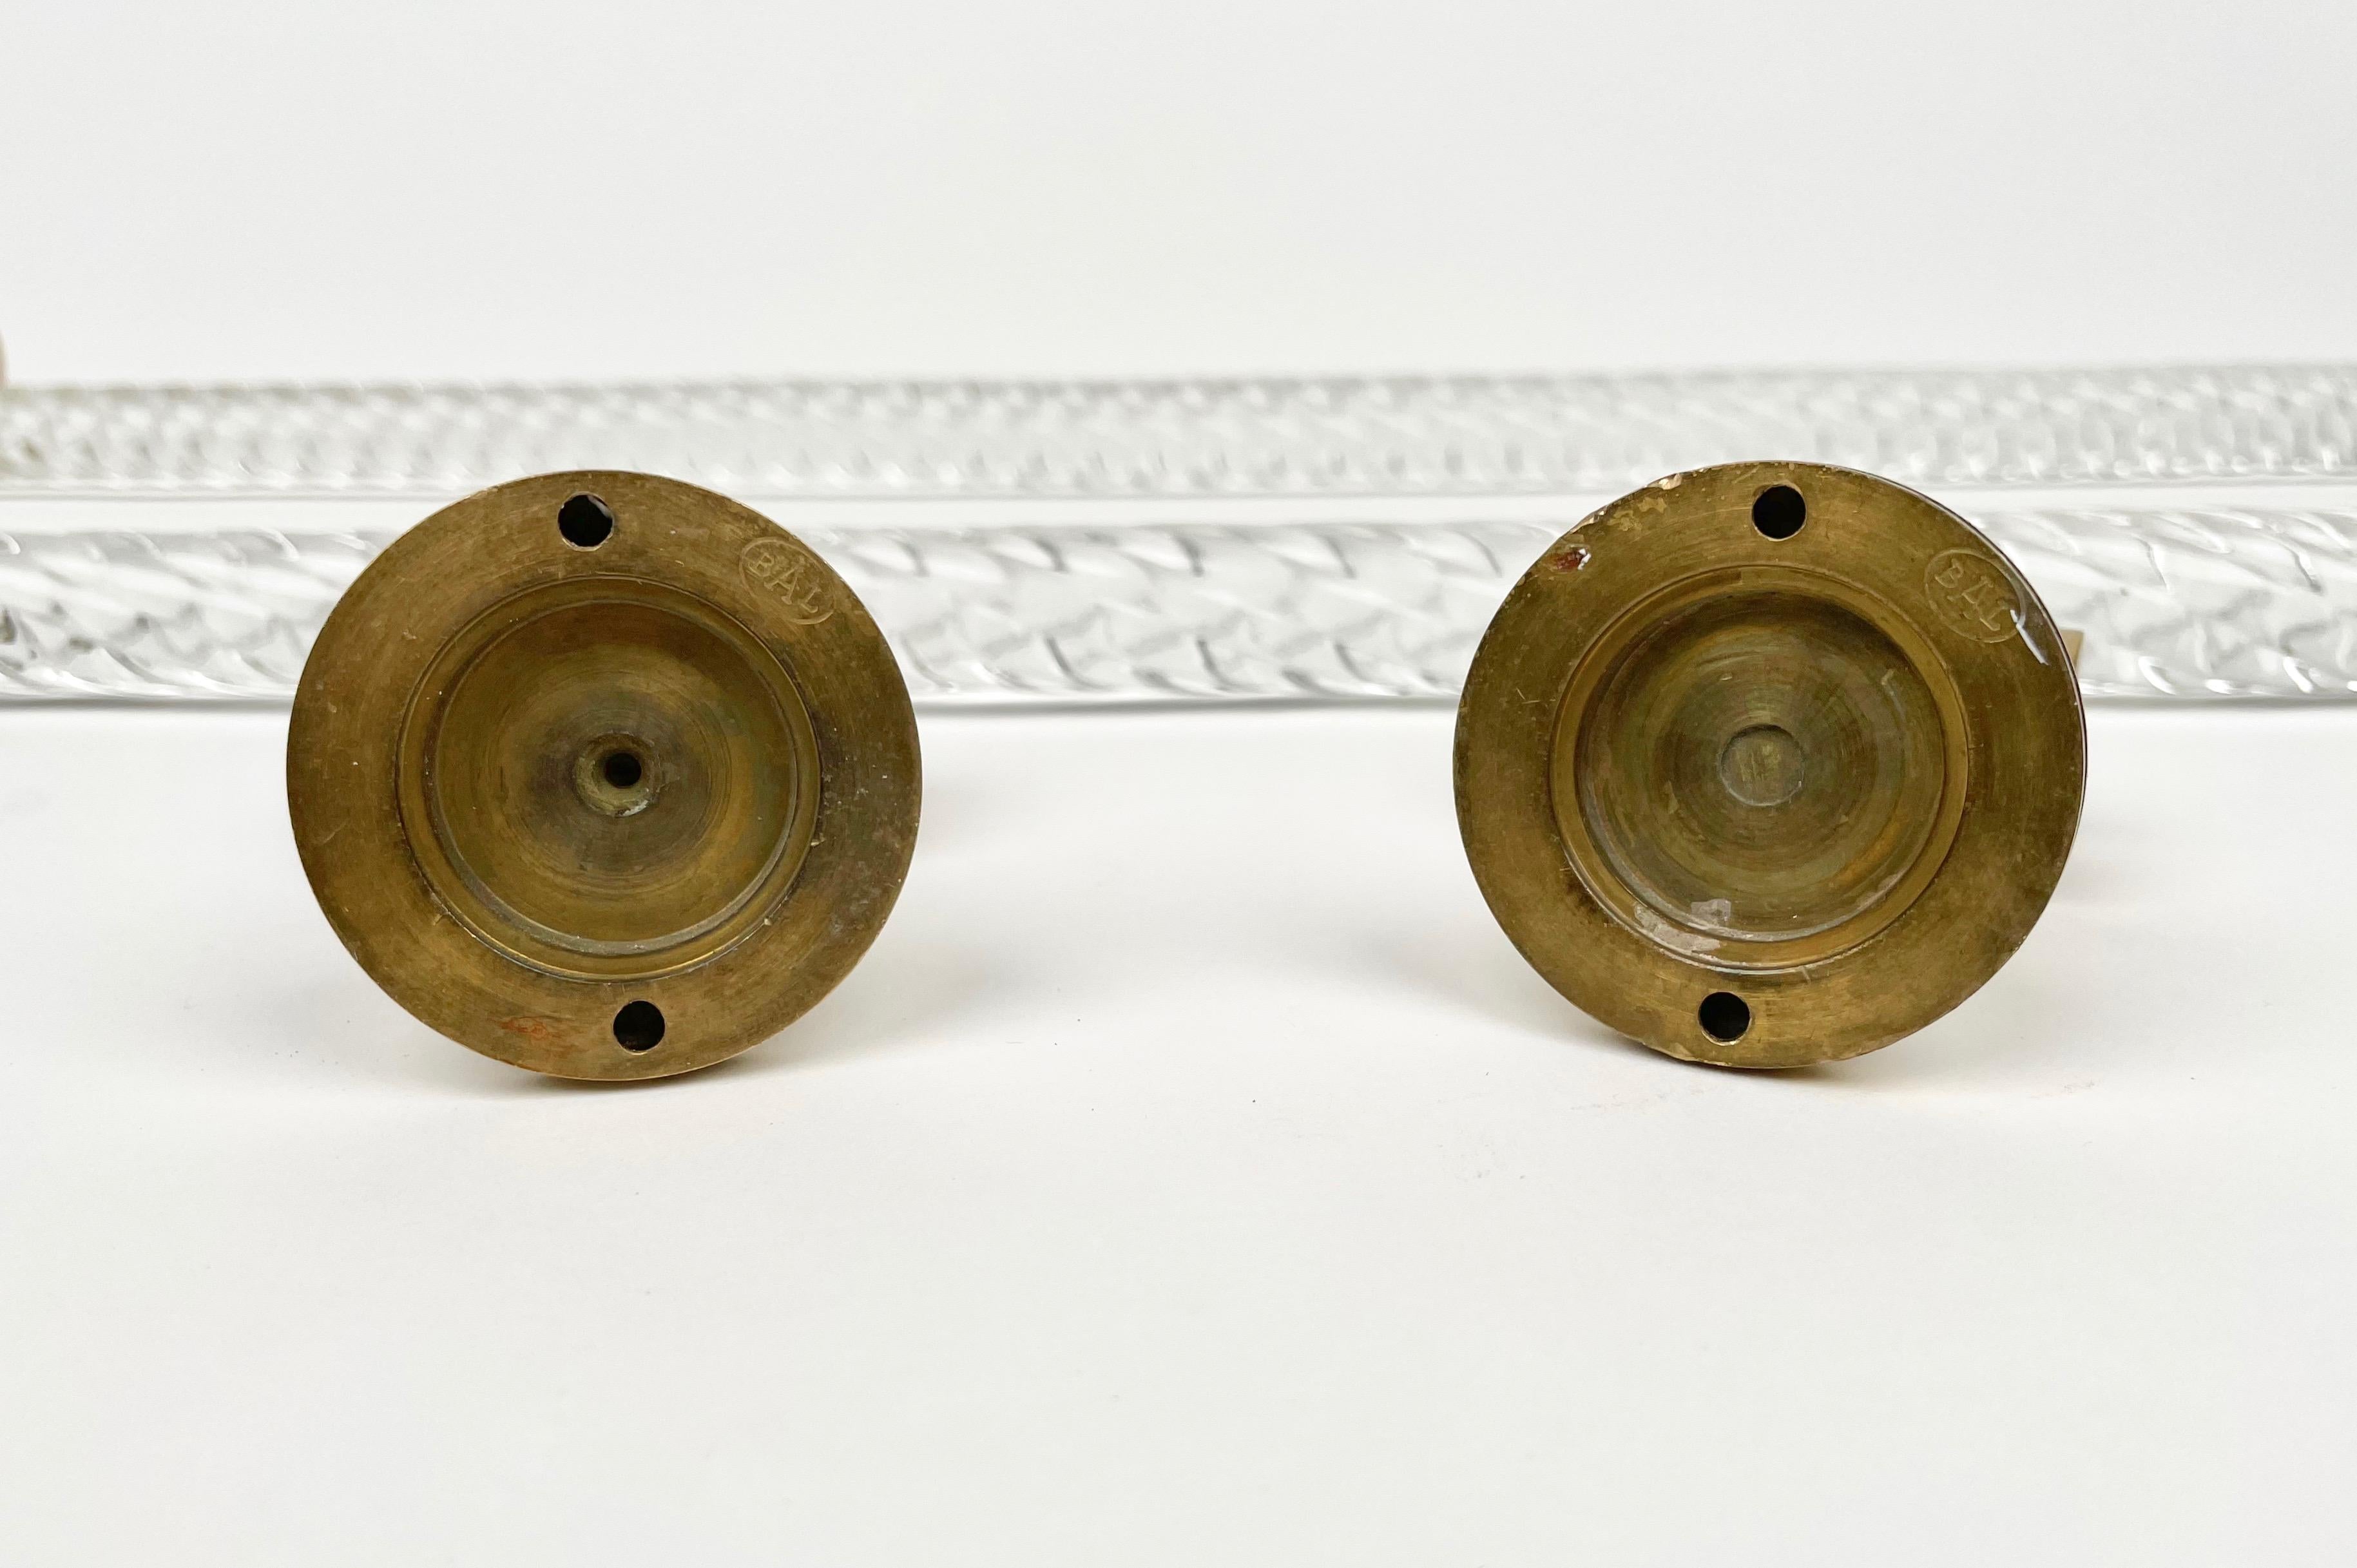 Bathroom Set of Murano Glass & Brass Towel Holder, Italy, 1950s For Sale 3